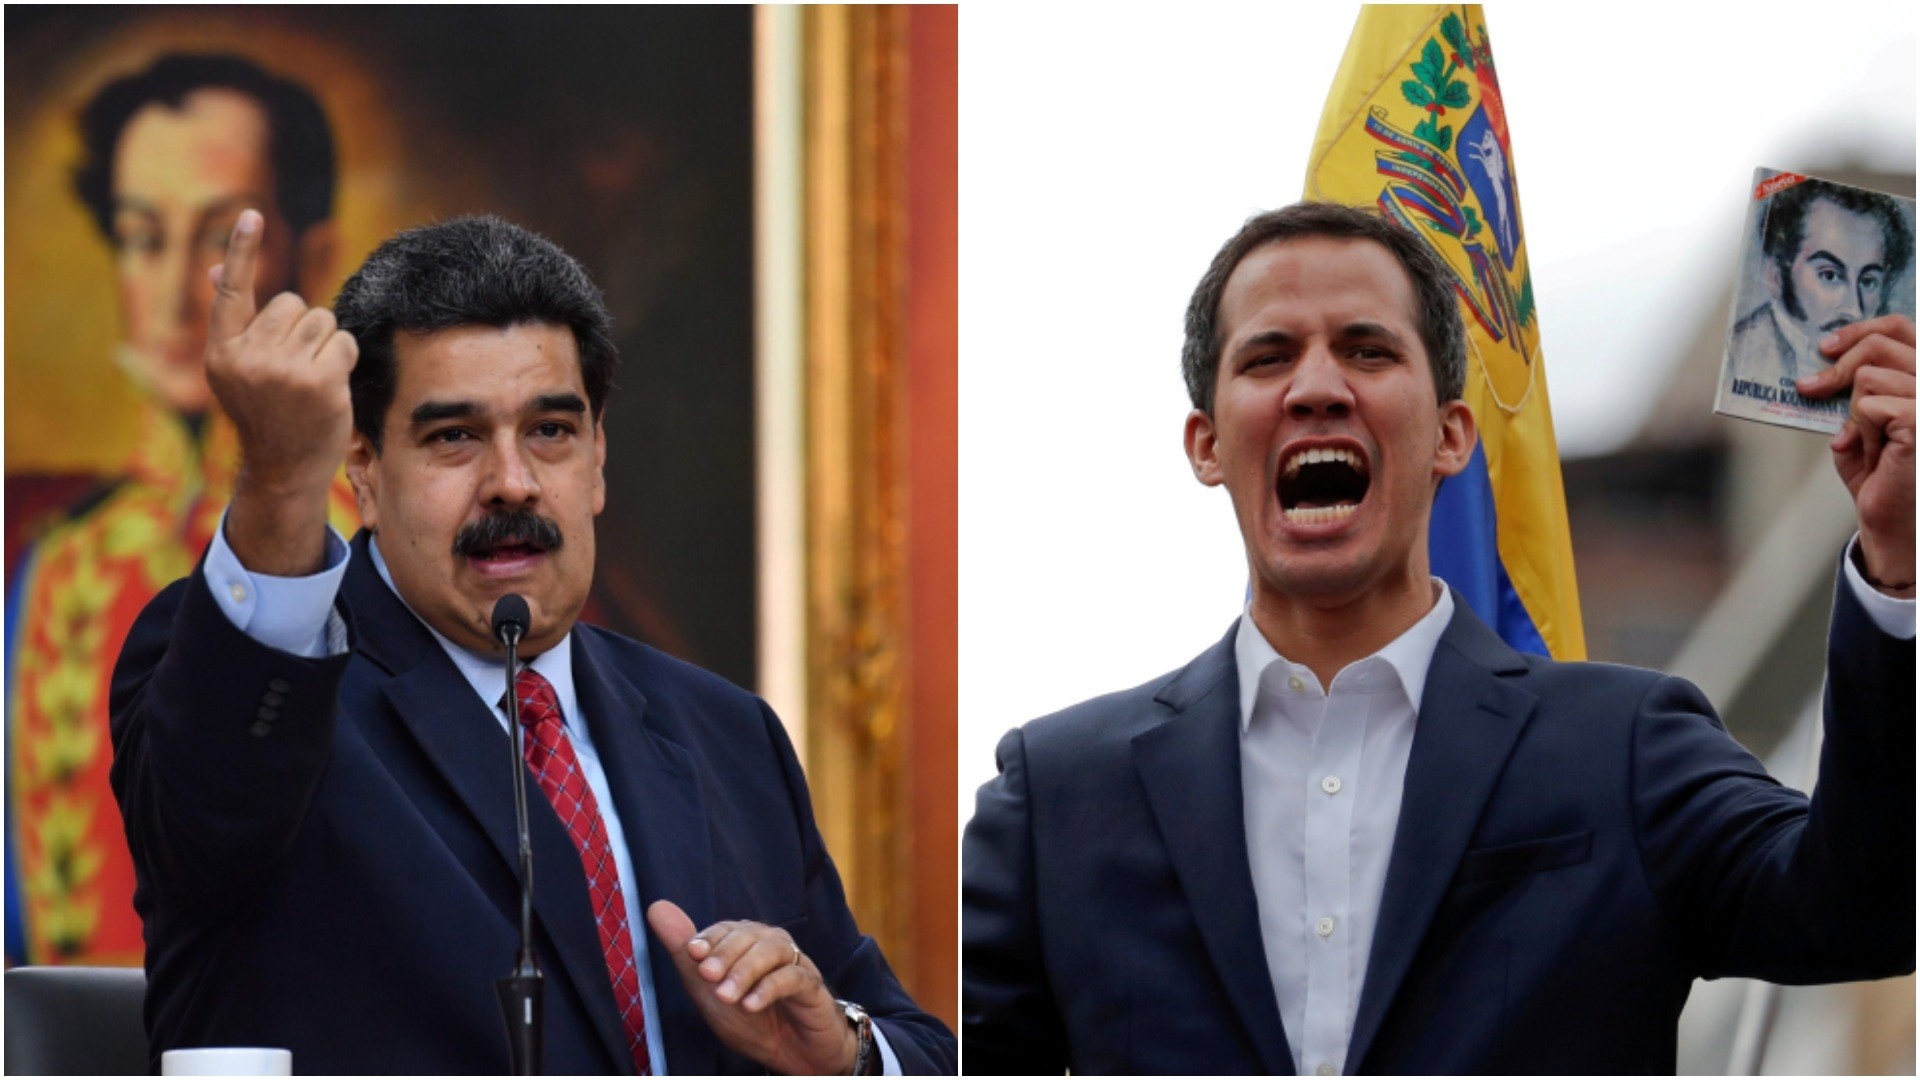 This combination of photos shows Venezuela's President Nicolas Maduro (R) speaking during a press conference and National Assembly head Juan Guaido talking to the crowd during a mass opposition rally. (AFP/REUTERS Photos)